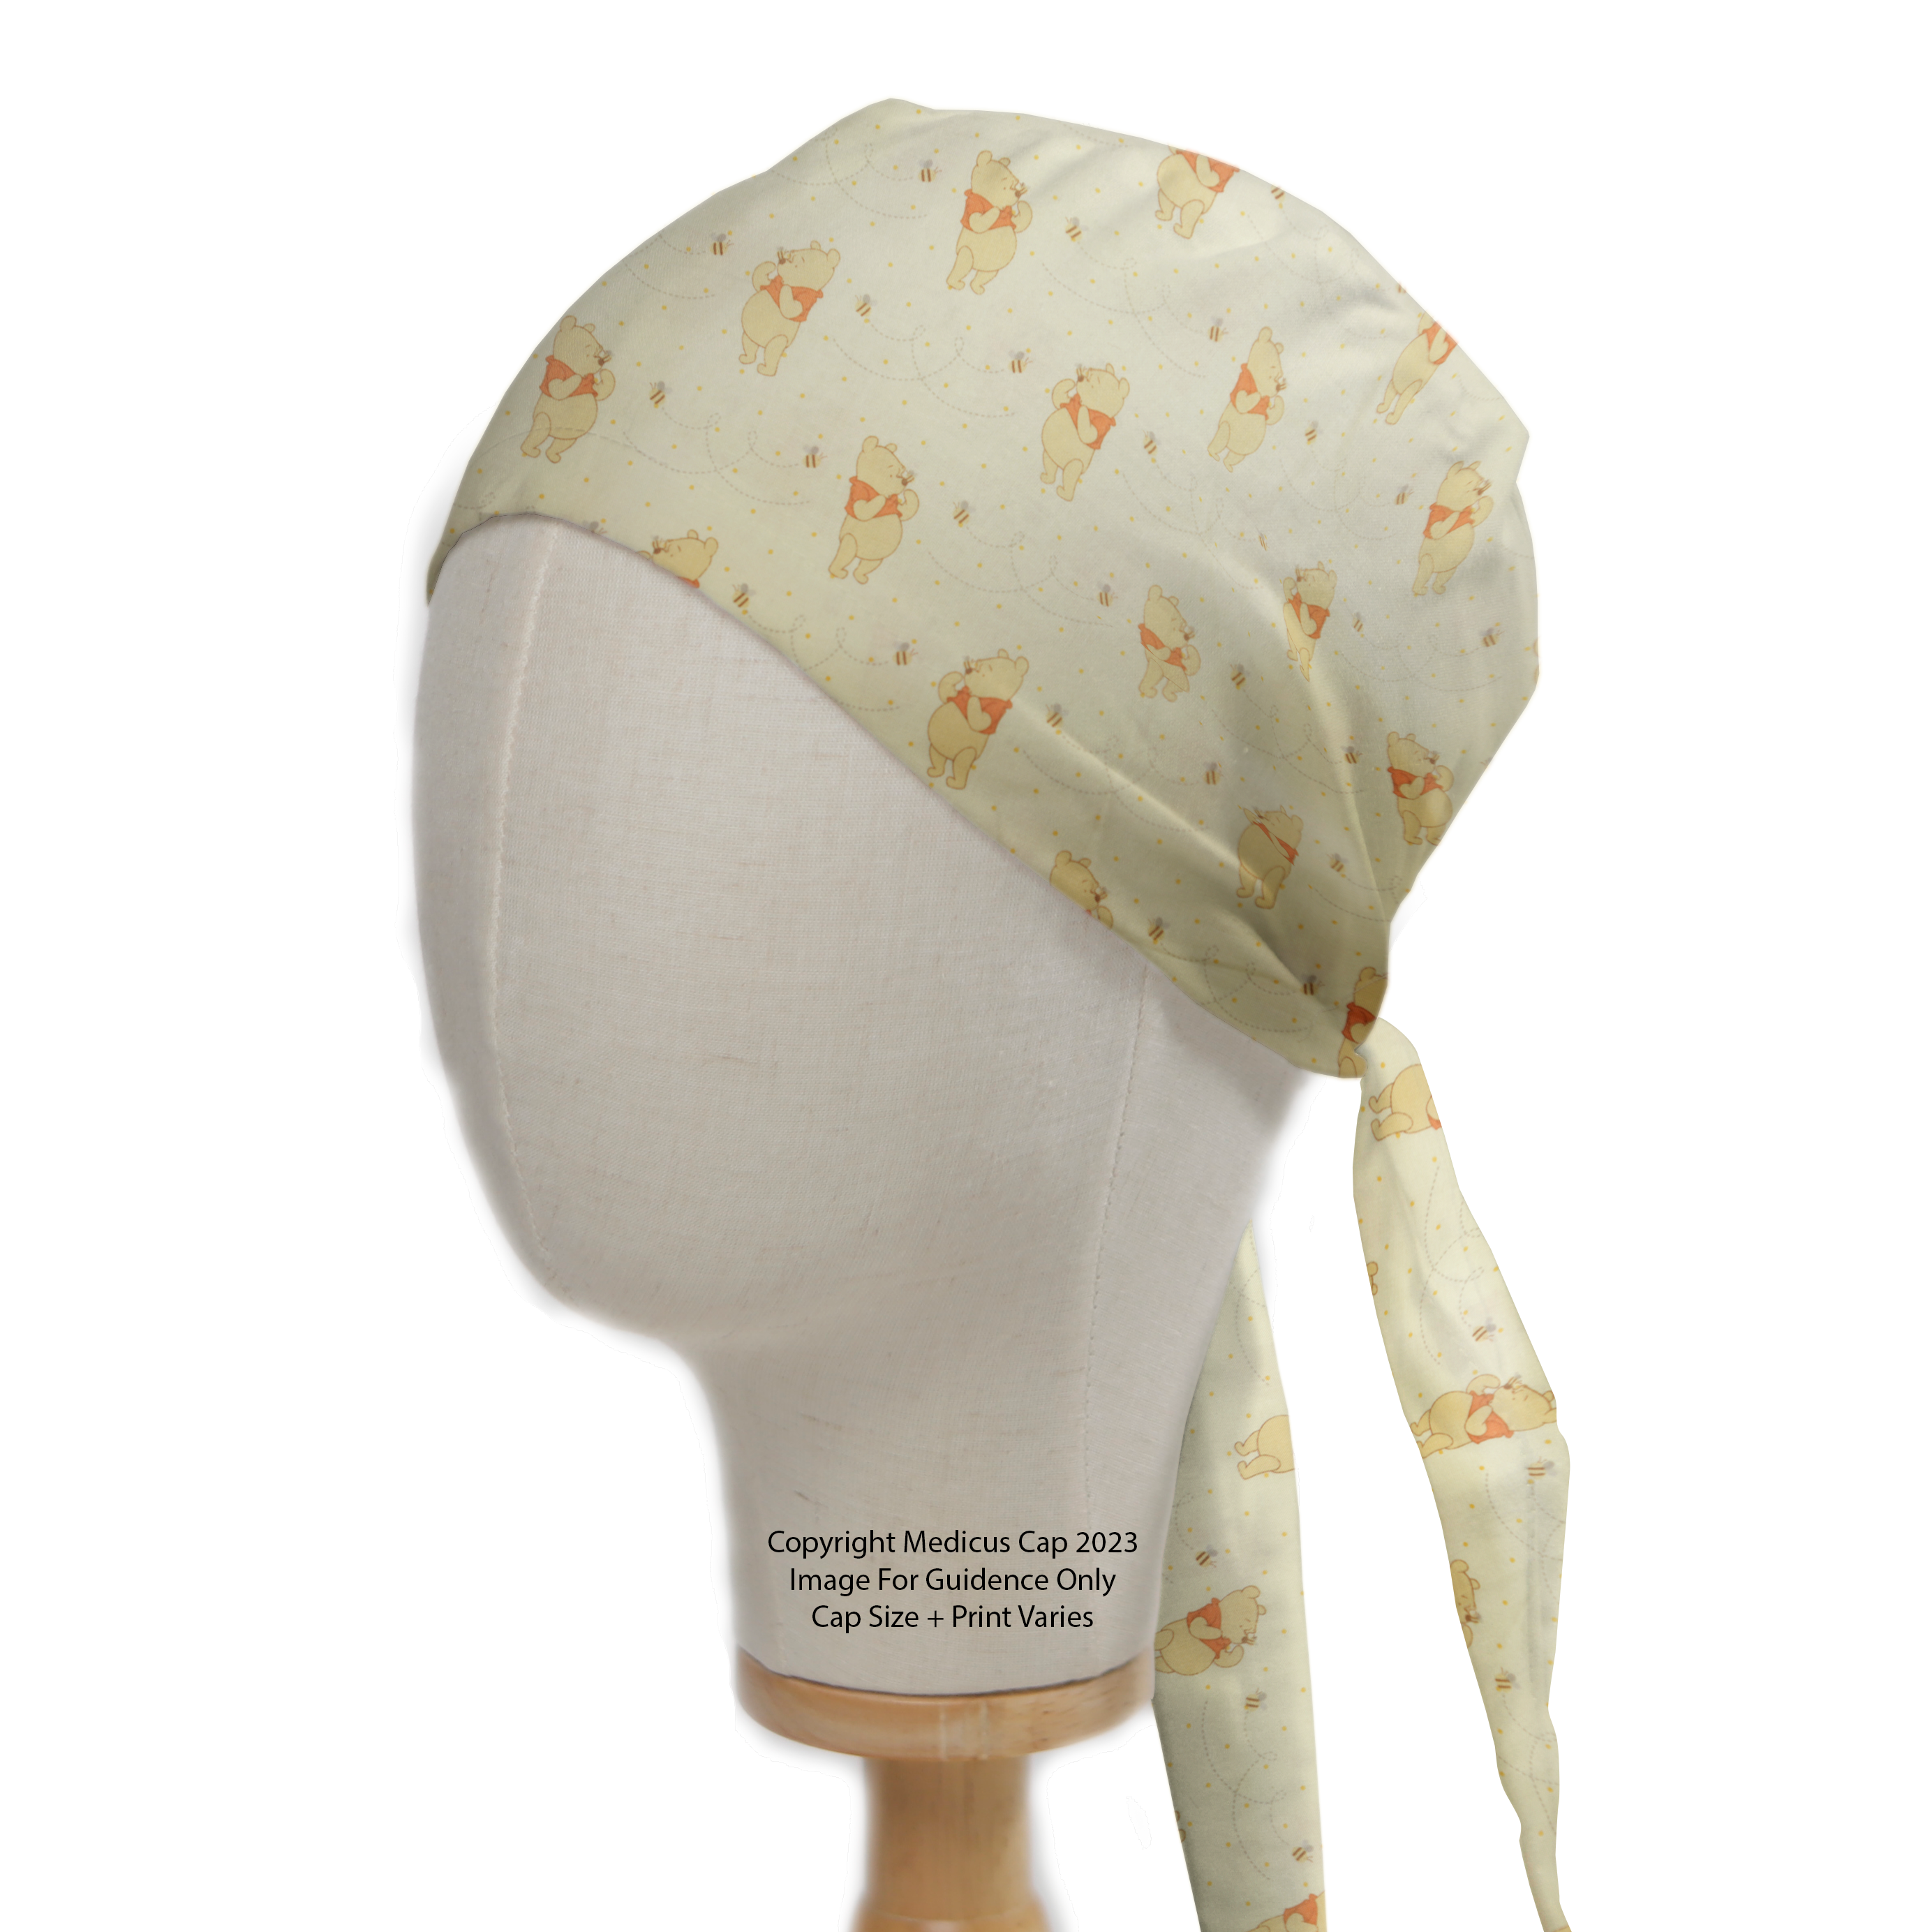 Winnie The Pooh Honey + Bees Scrub Cap - Scrub Cap from Medicus Scrub Caps - Shop now at Medicus Scrub Caps - all, Animals, Bears, new-arrivals, Patterned Scrub Caps, scrub cap, Winnie The Pooh